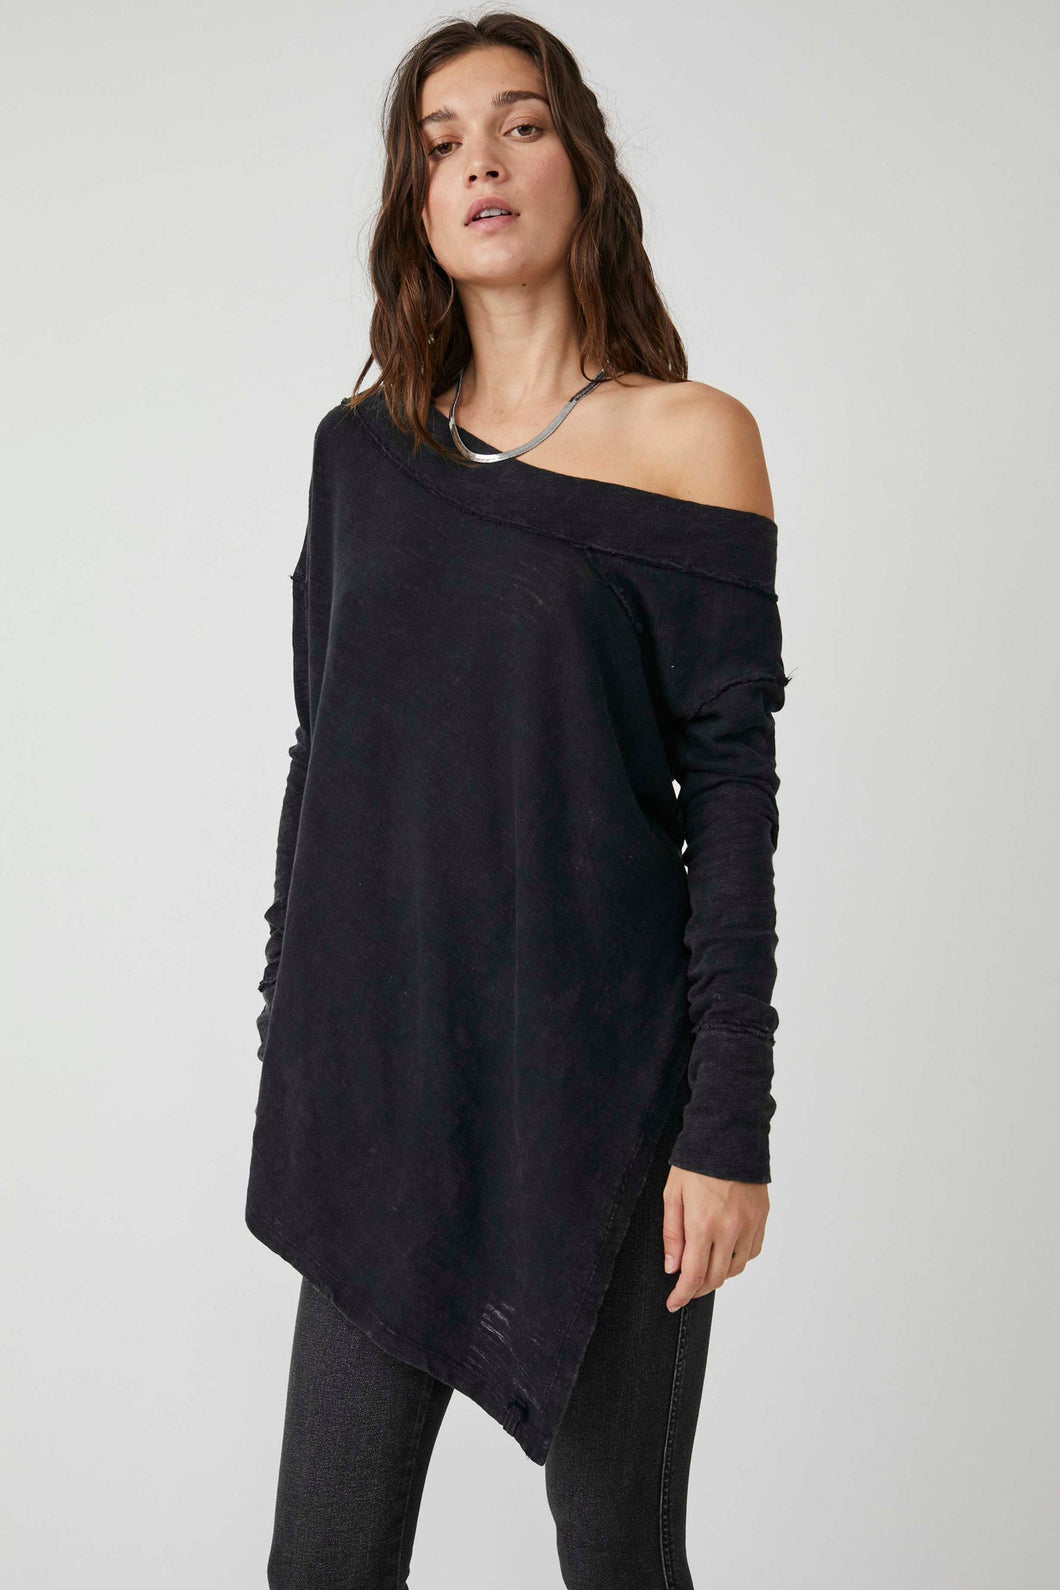 FREE PEOPLE TO THE RIGHT LONGSLEEVE